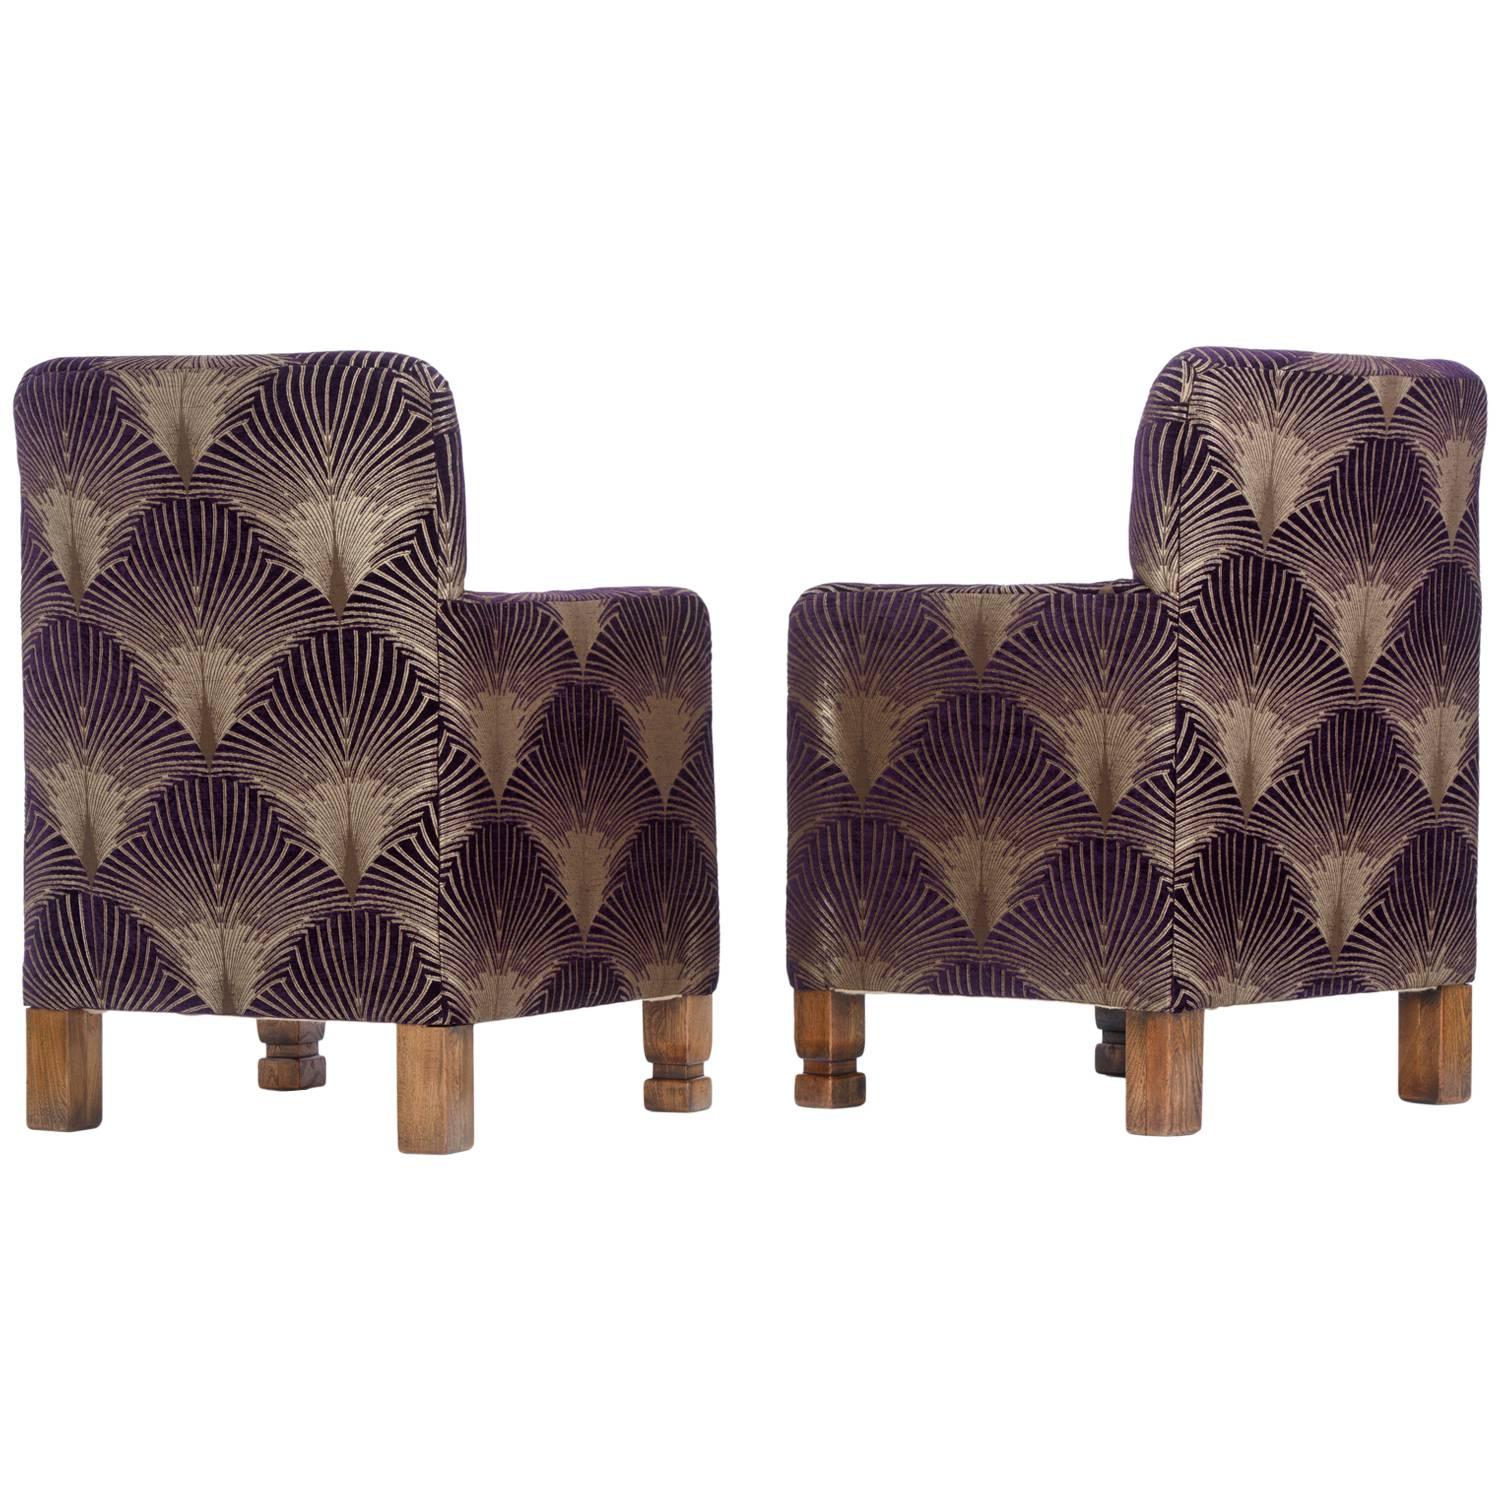 The Duo of Art Deco Style Aubergine 'Metropolis' Armchairs. For Sale